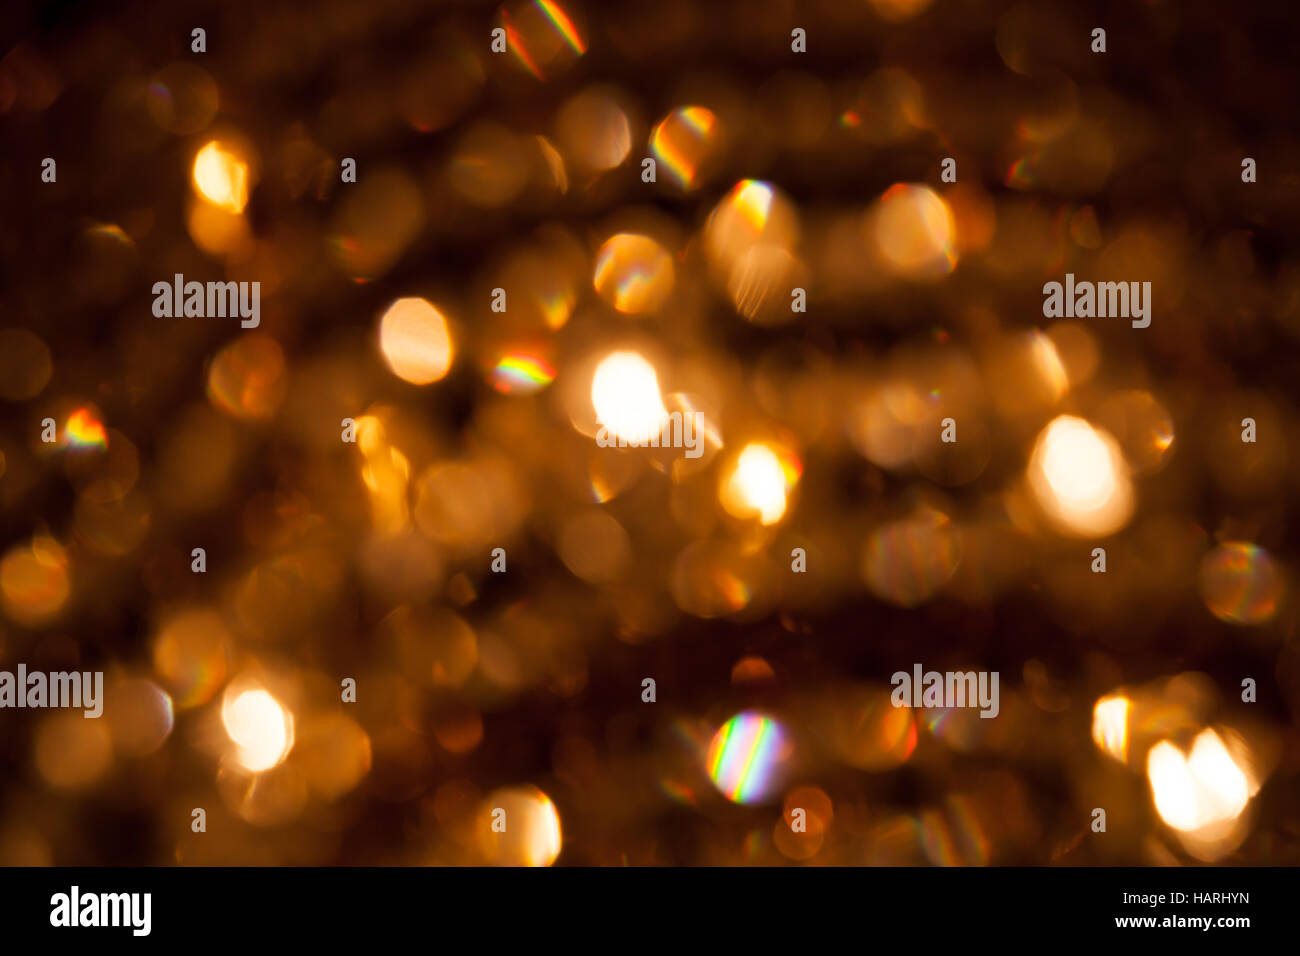 Defocused abstract golden lights background. Natural bokeh photo with rainbow refraction patterns Stock Photo